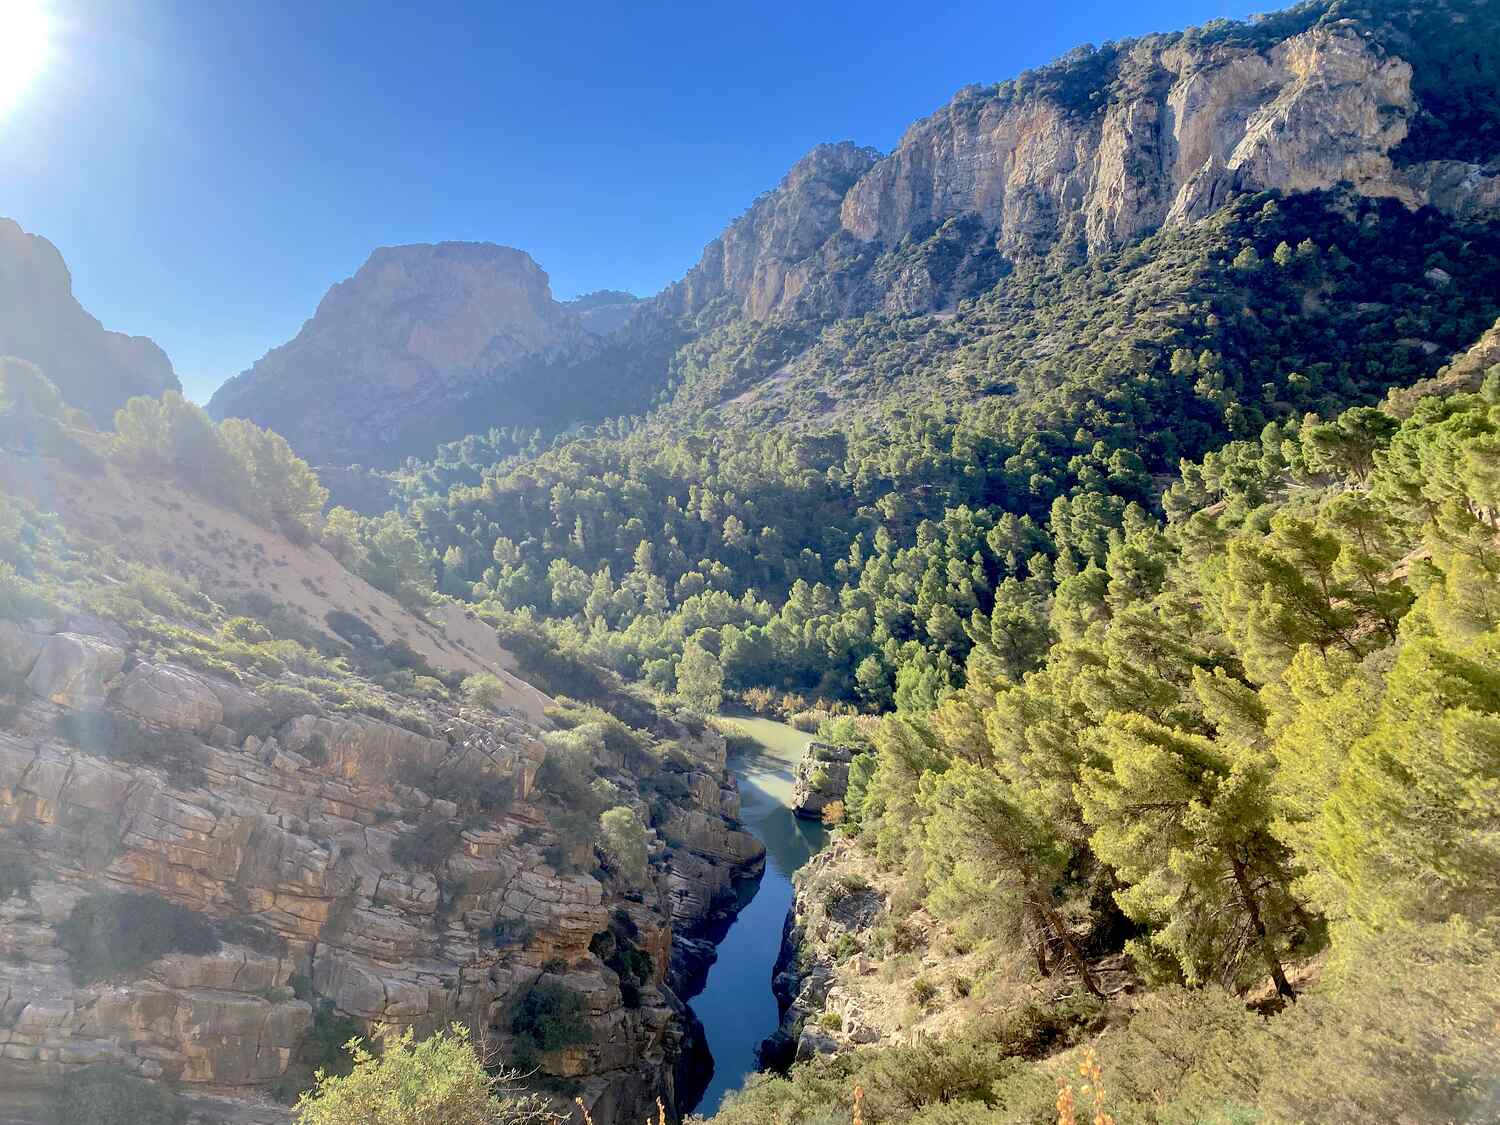 Verdant mountain valley with winding river seen from the Caminito del Rey path